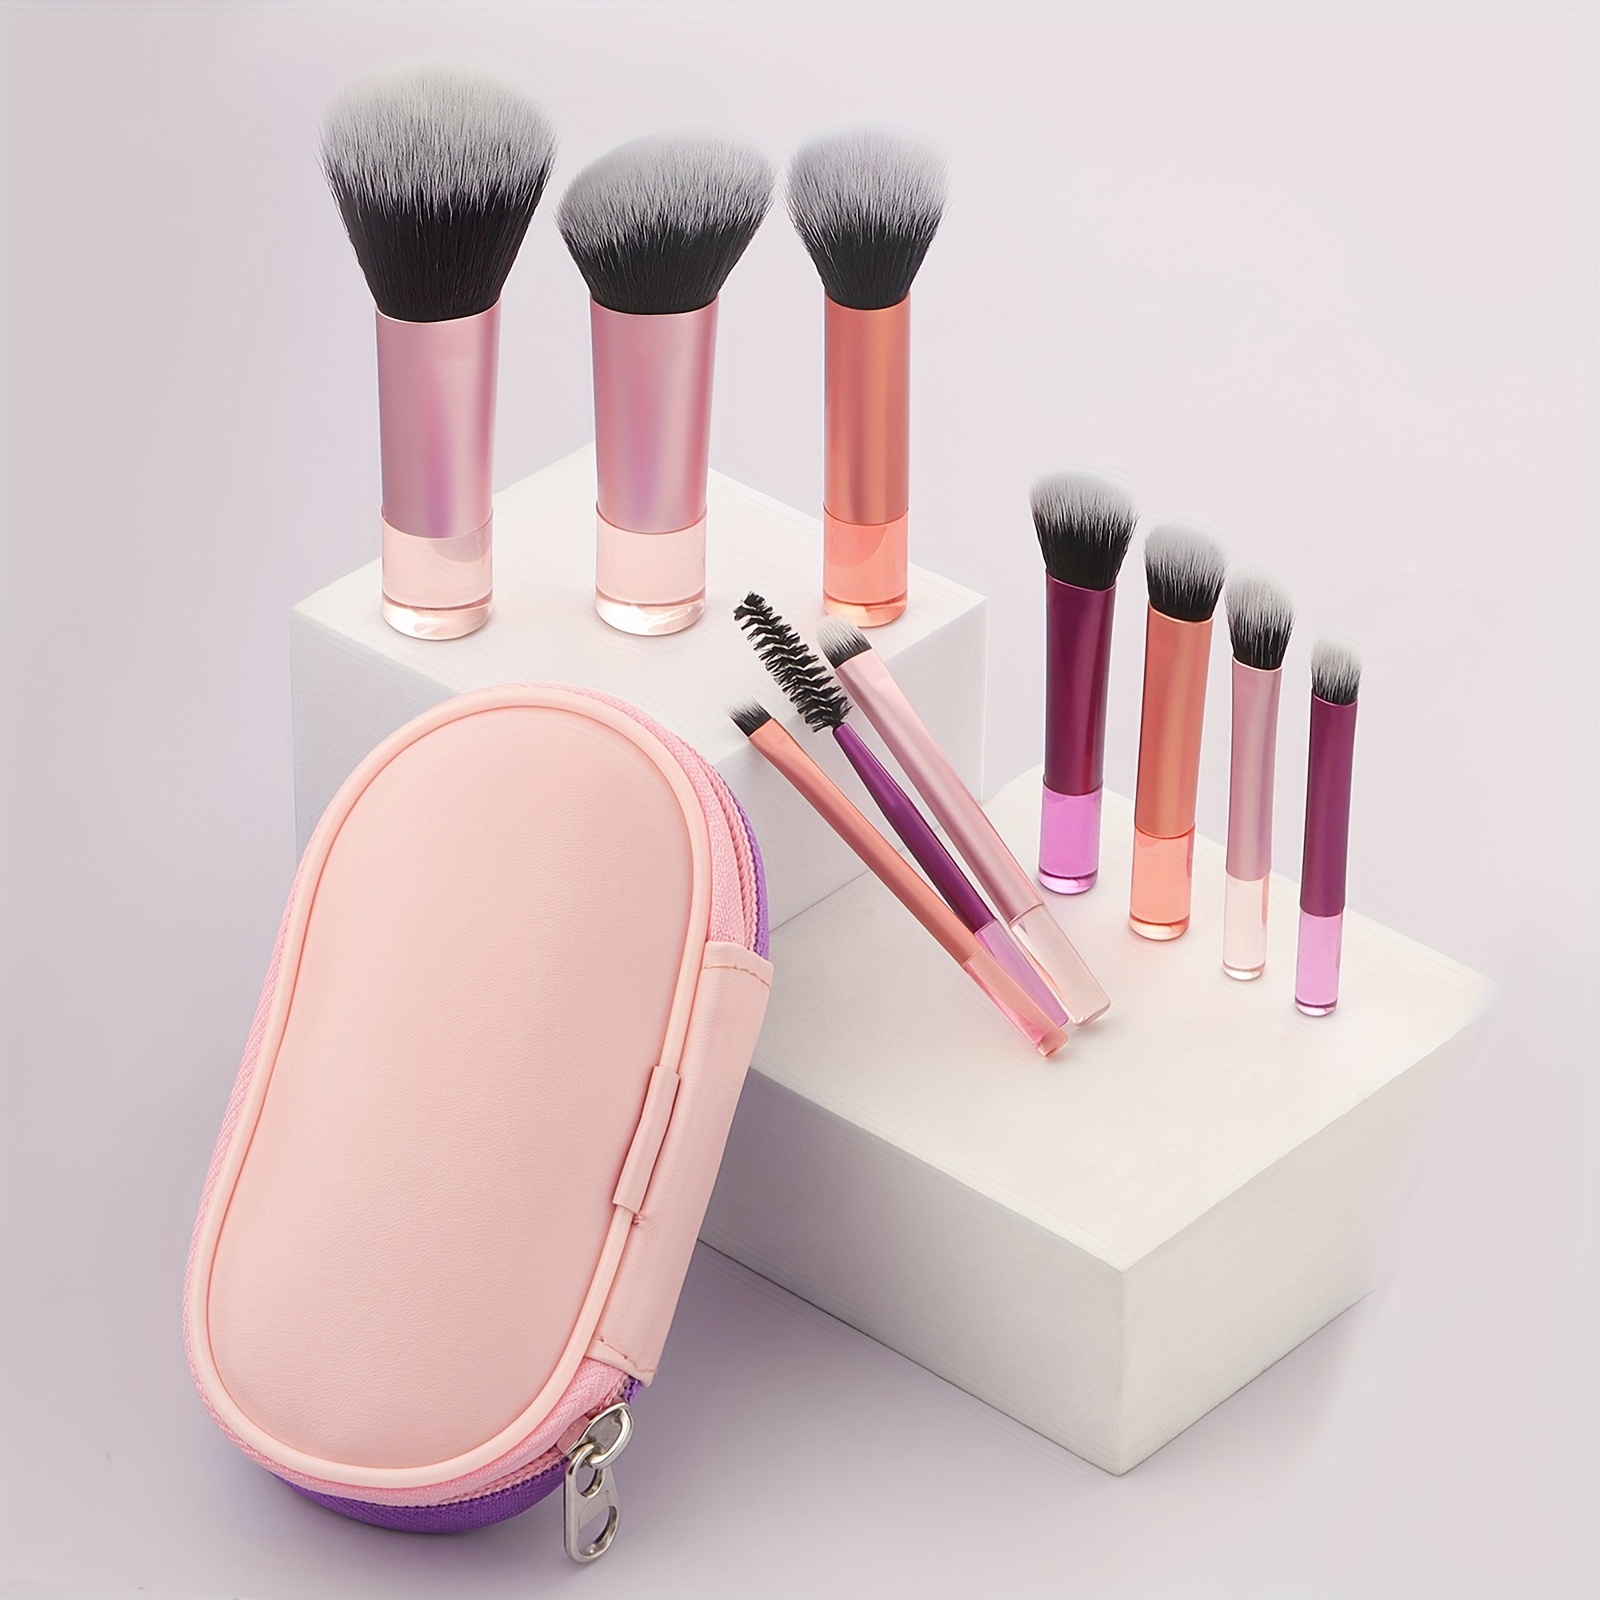 

Mini Makeup Brush Sets, 10pcs Minimalist Portable With Storage Bag Portable Cosmetic Brush For Making Up Supply, Travel Essentials